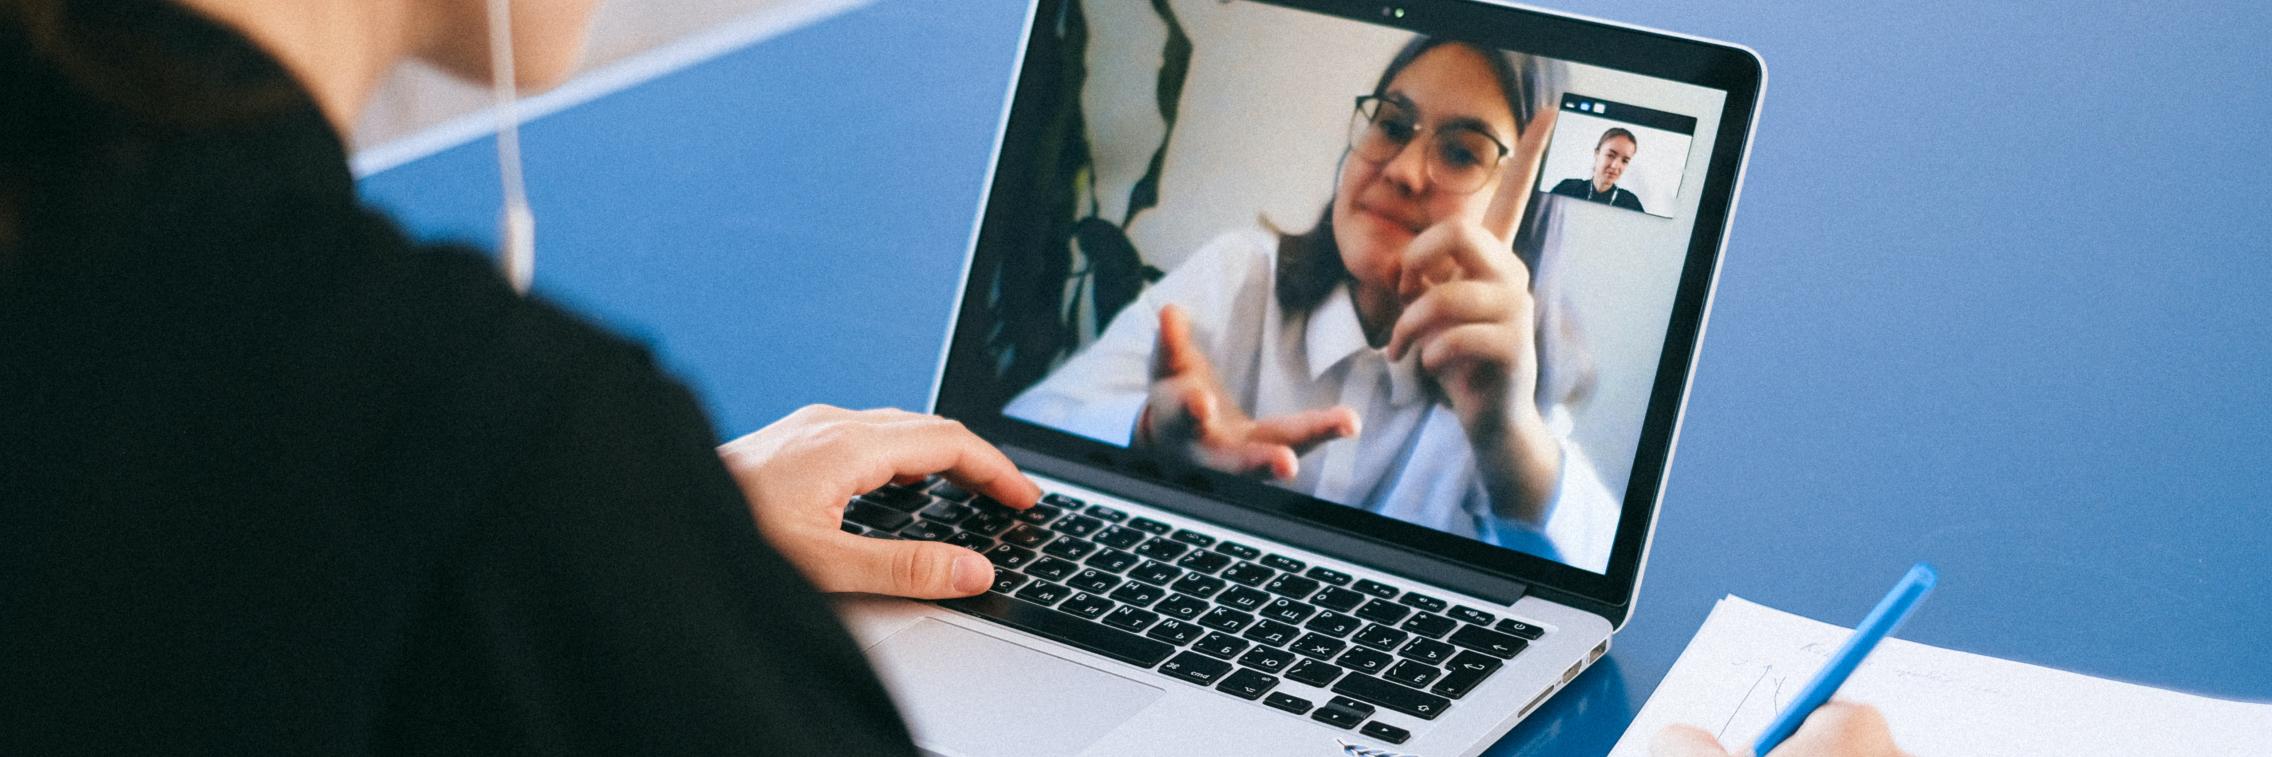 Woman videoconferencing on laptop